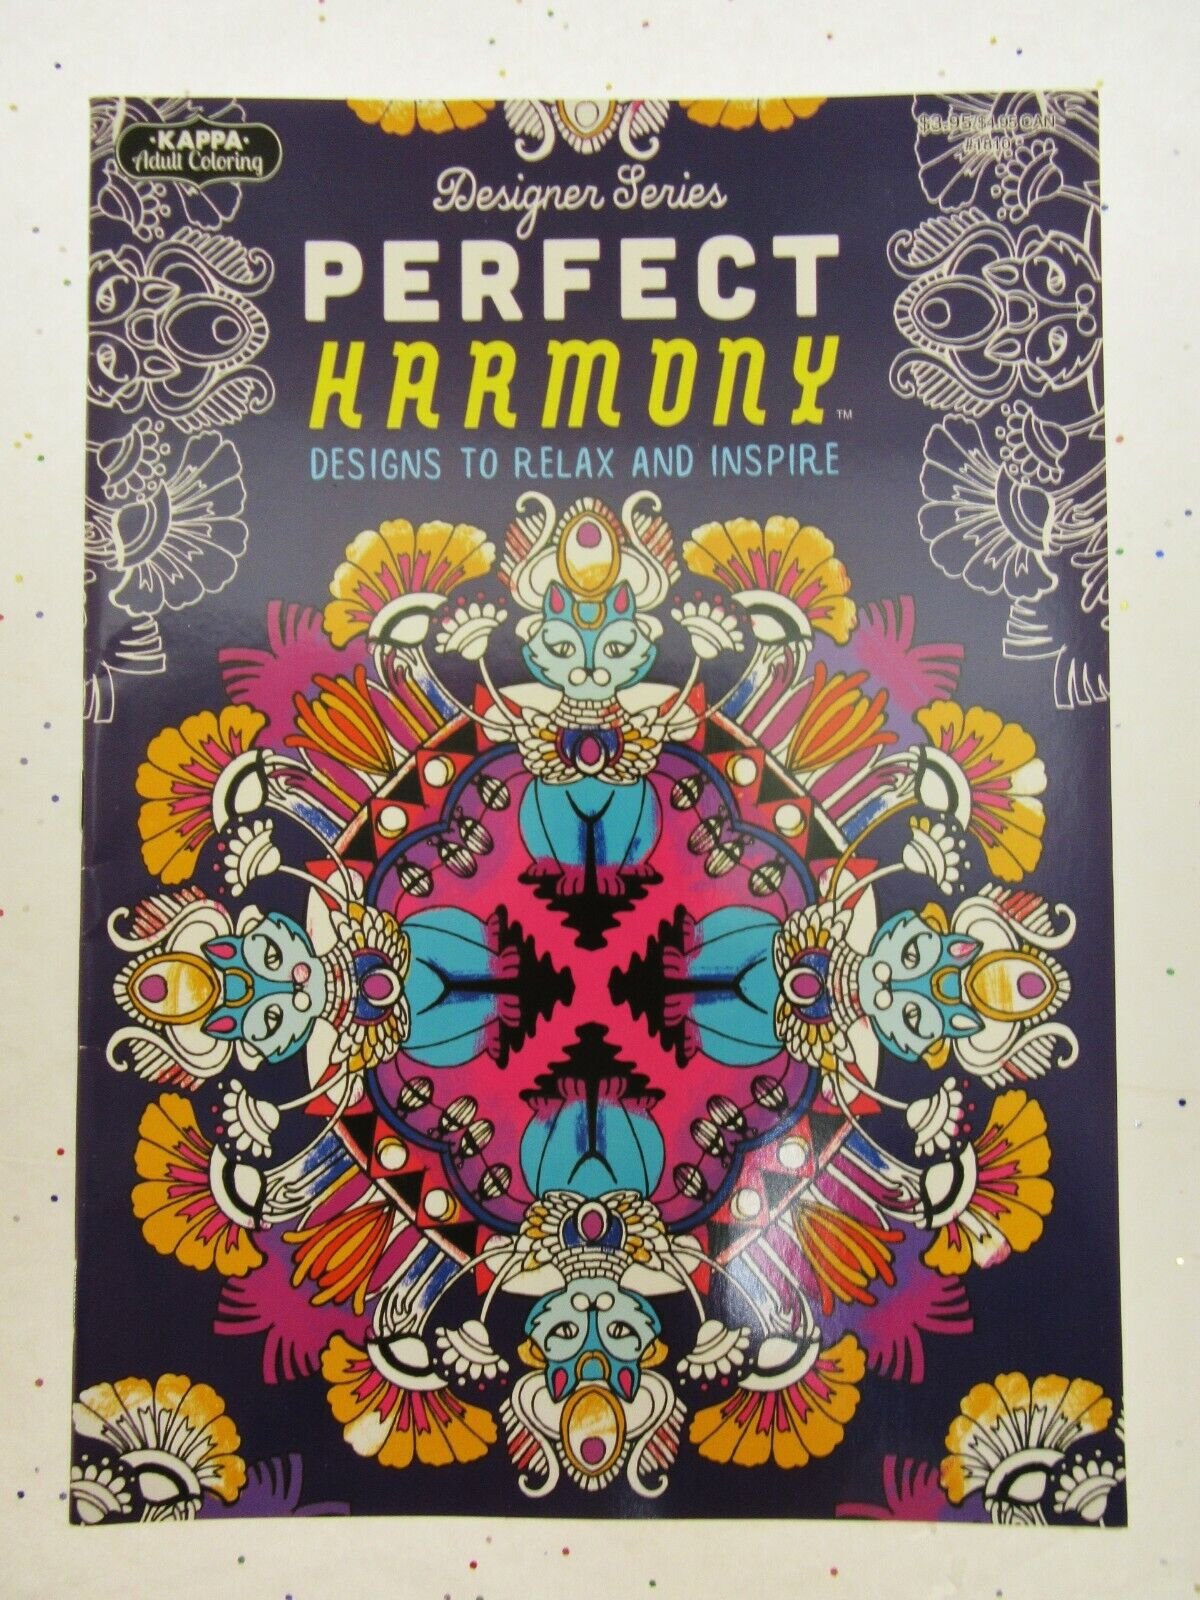 32 page Kappa Adult Coloring Book Perfect Harmony Craft Art with Color Pencils